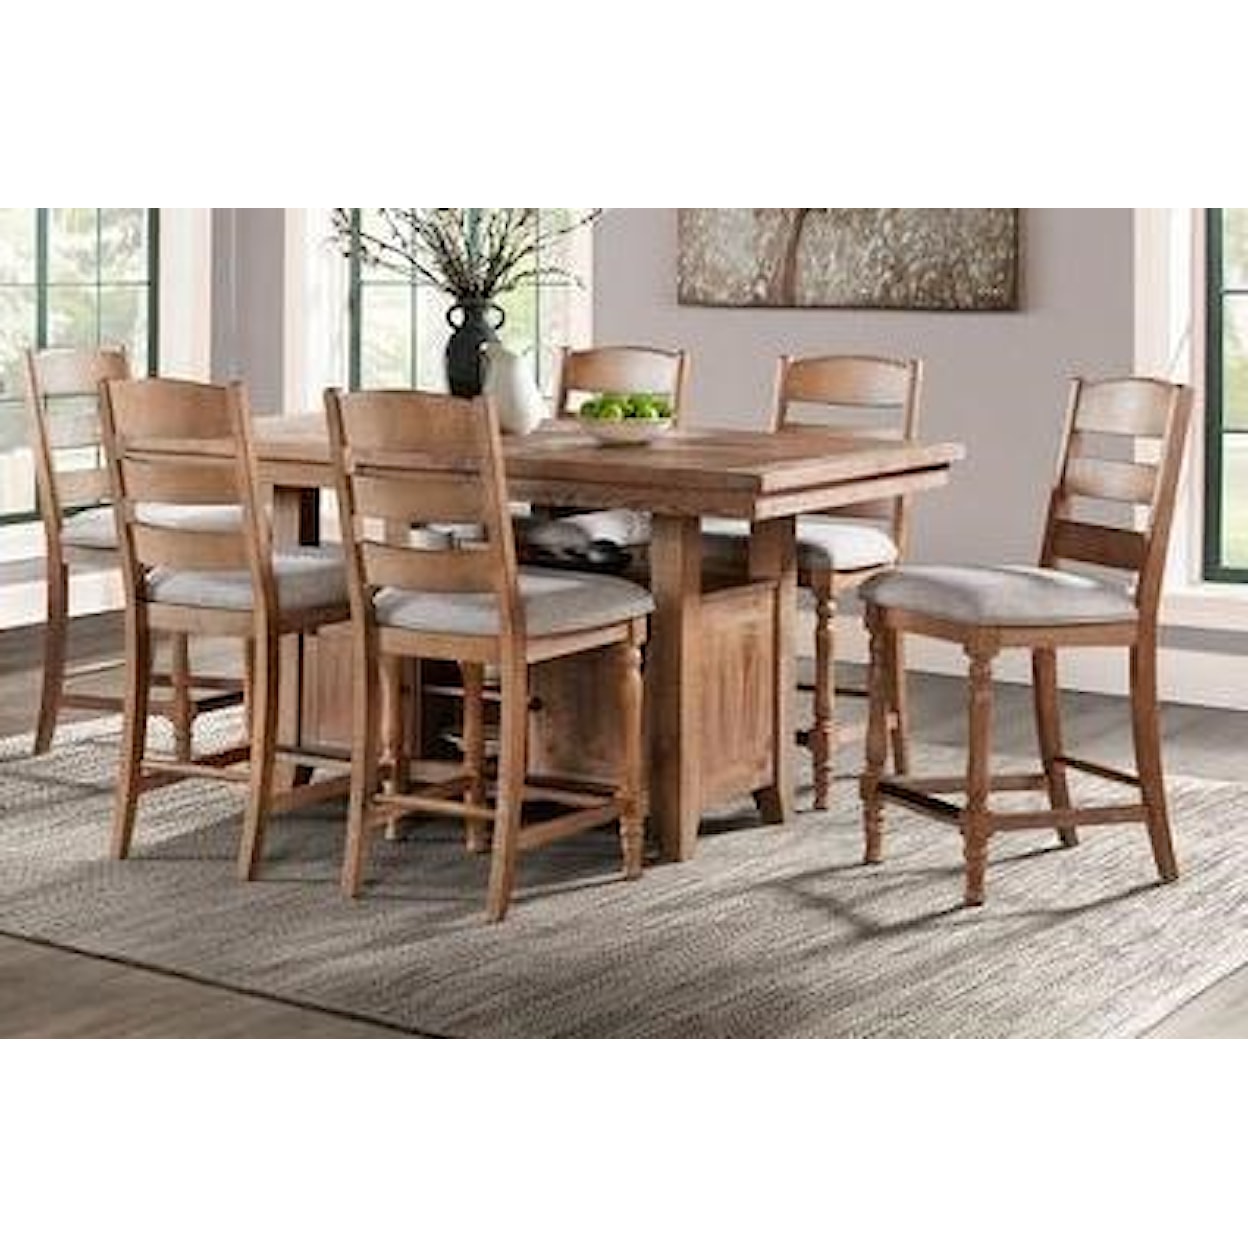 VFM Signature Highland 7-Piece Counter Height Table and Chair Set